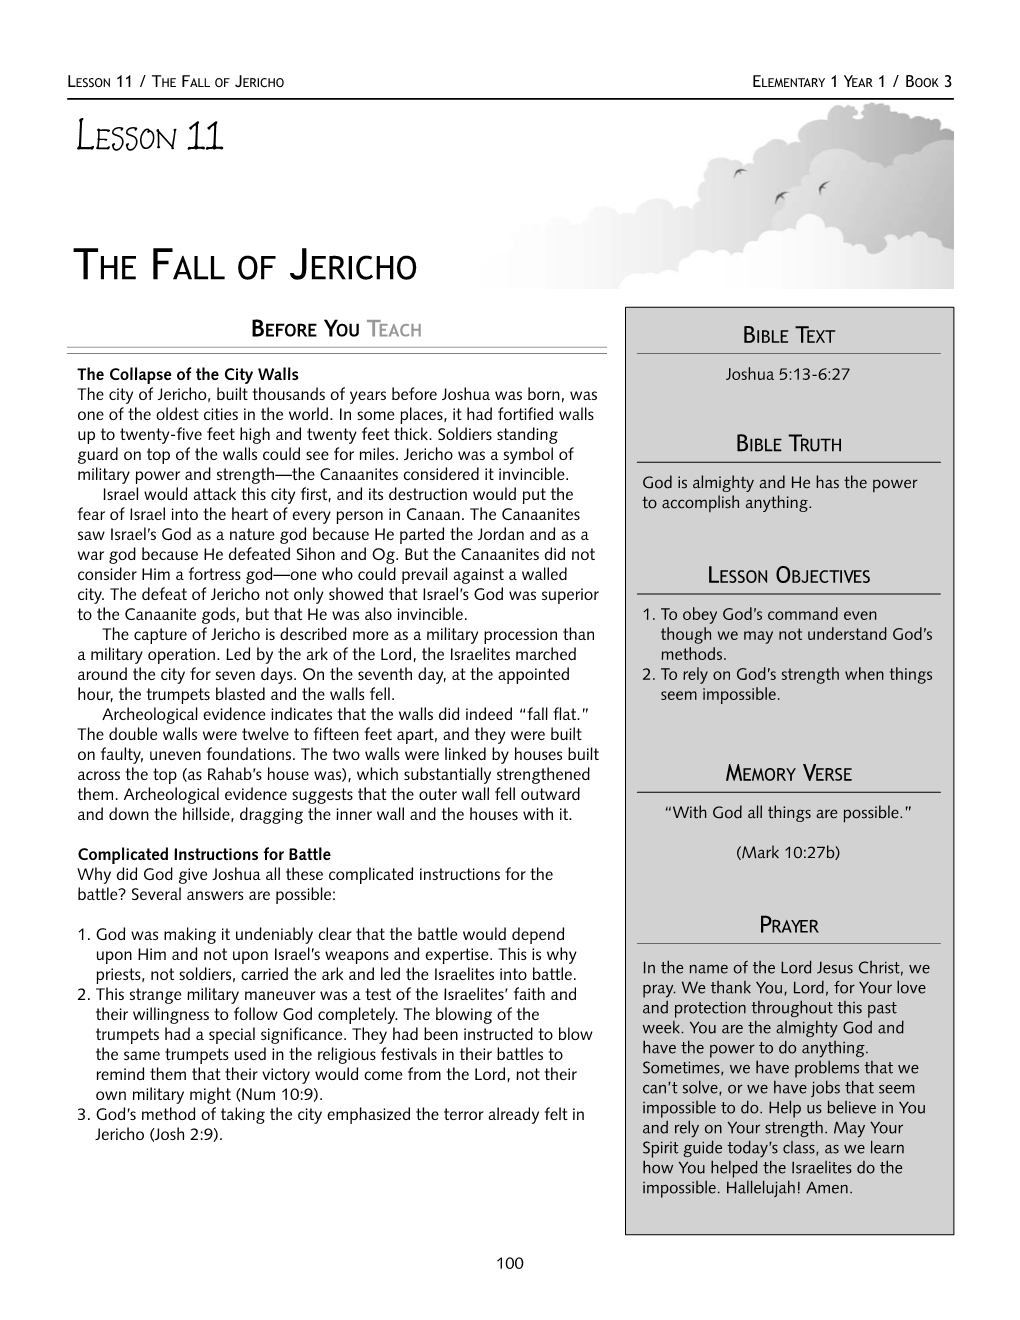 The Fall of Jericho Elementary 1 Year 1 / Book 3 Lesson 11